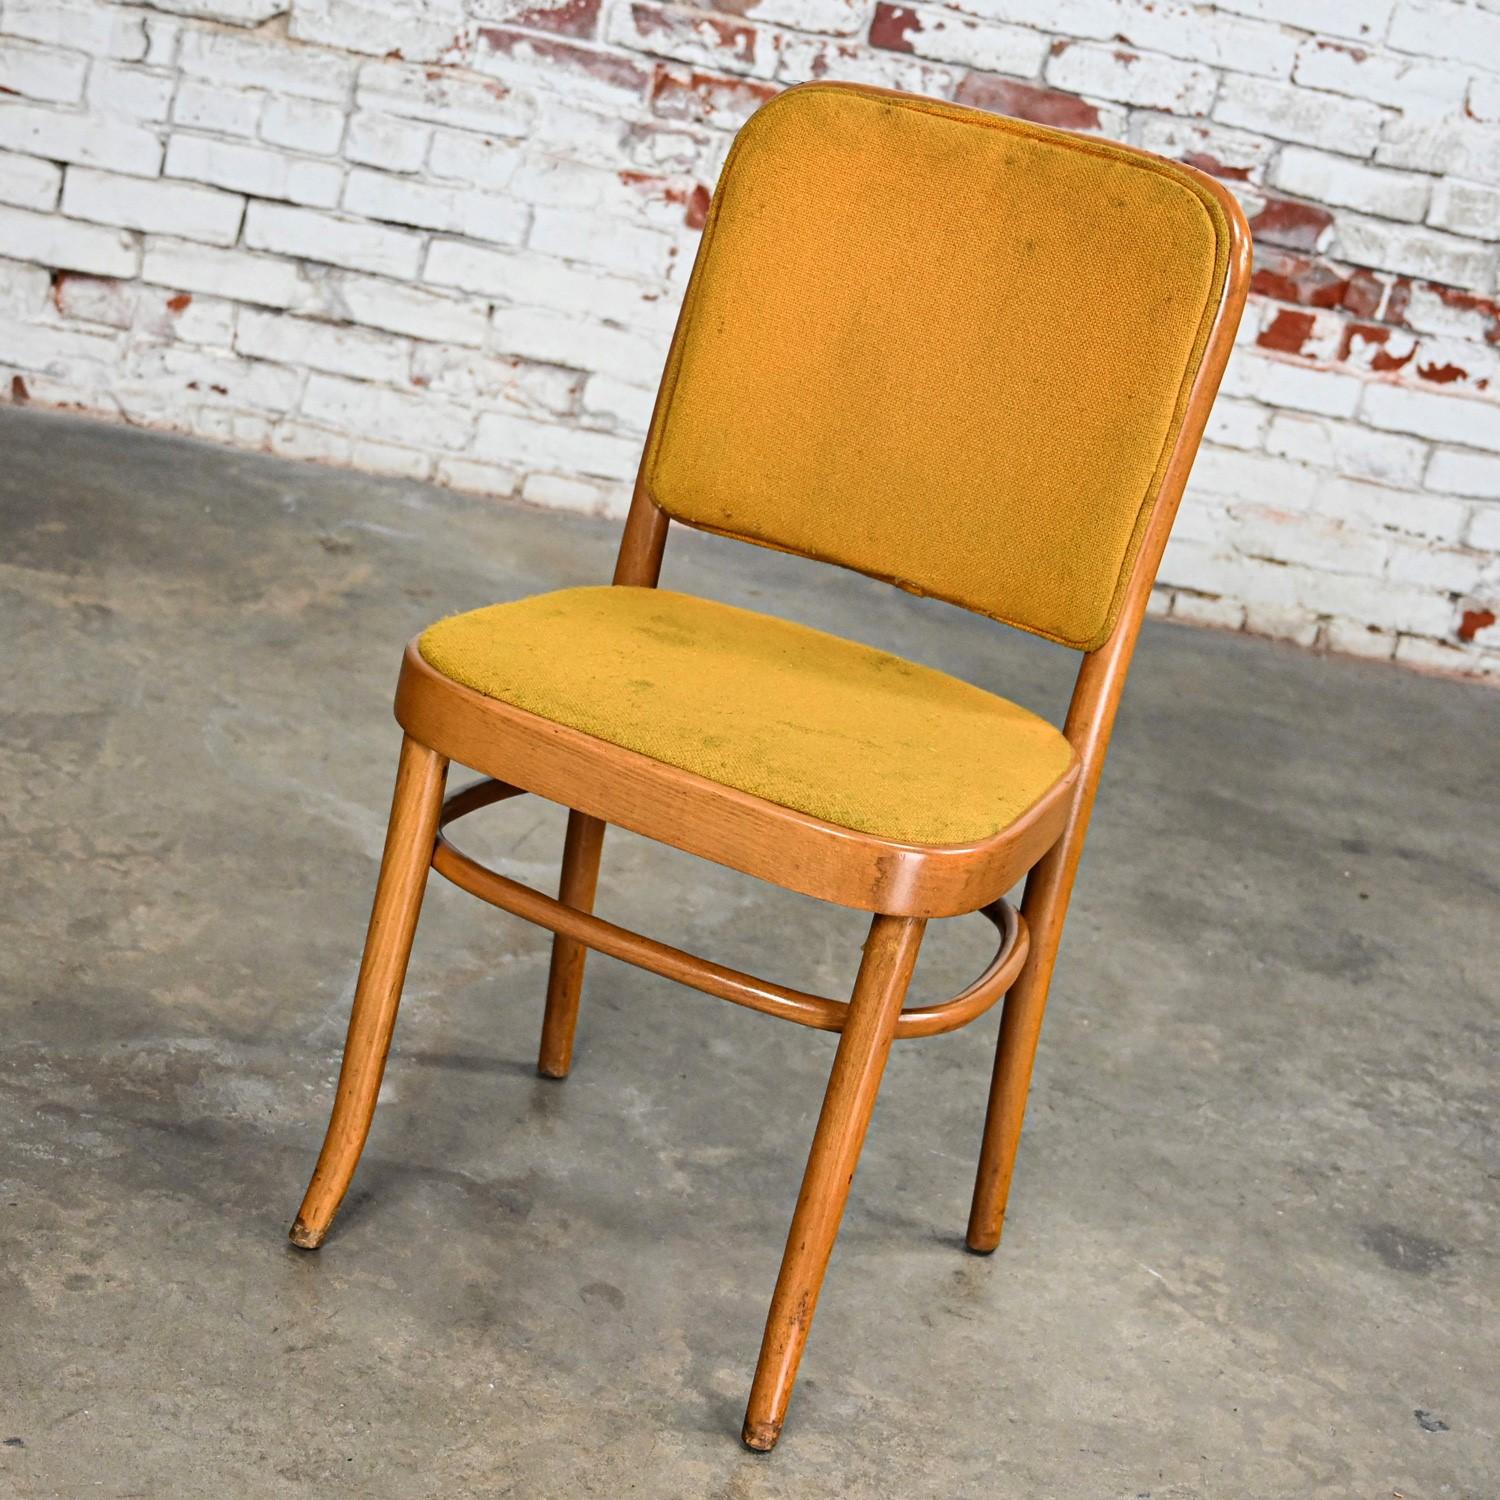 Wonderful vintage Bauhaus beech bentwood frame Thonet Josef Hoffman Prague 811 style armless side dining chairs by Falcon Products Inc. We have 24 and we are selling them separately. Beautiful condition, keeping in mind that these are vintage and